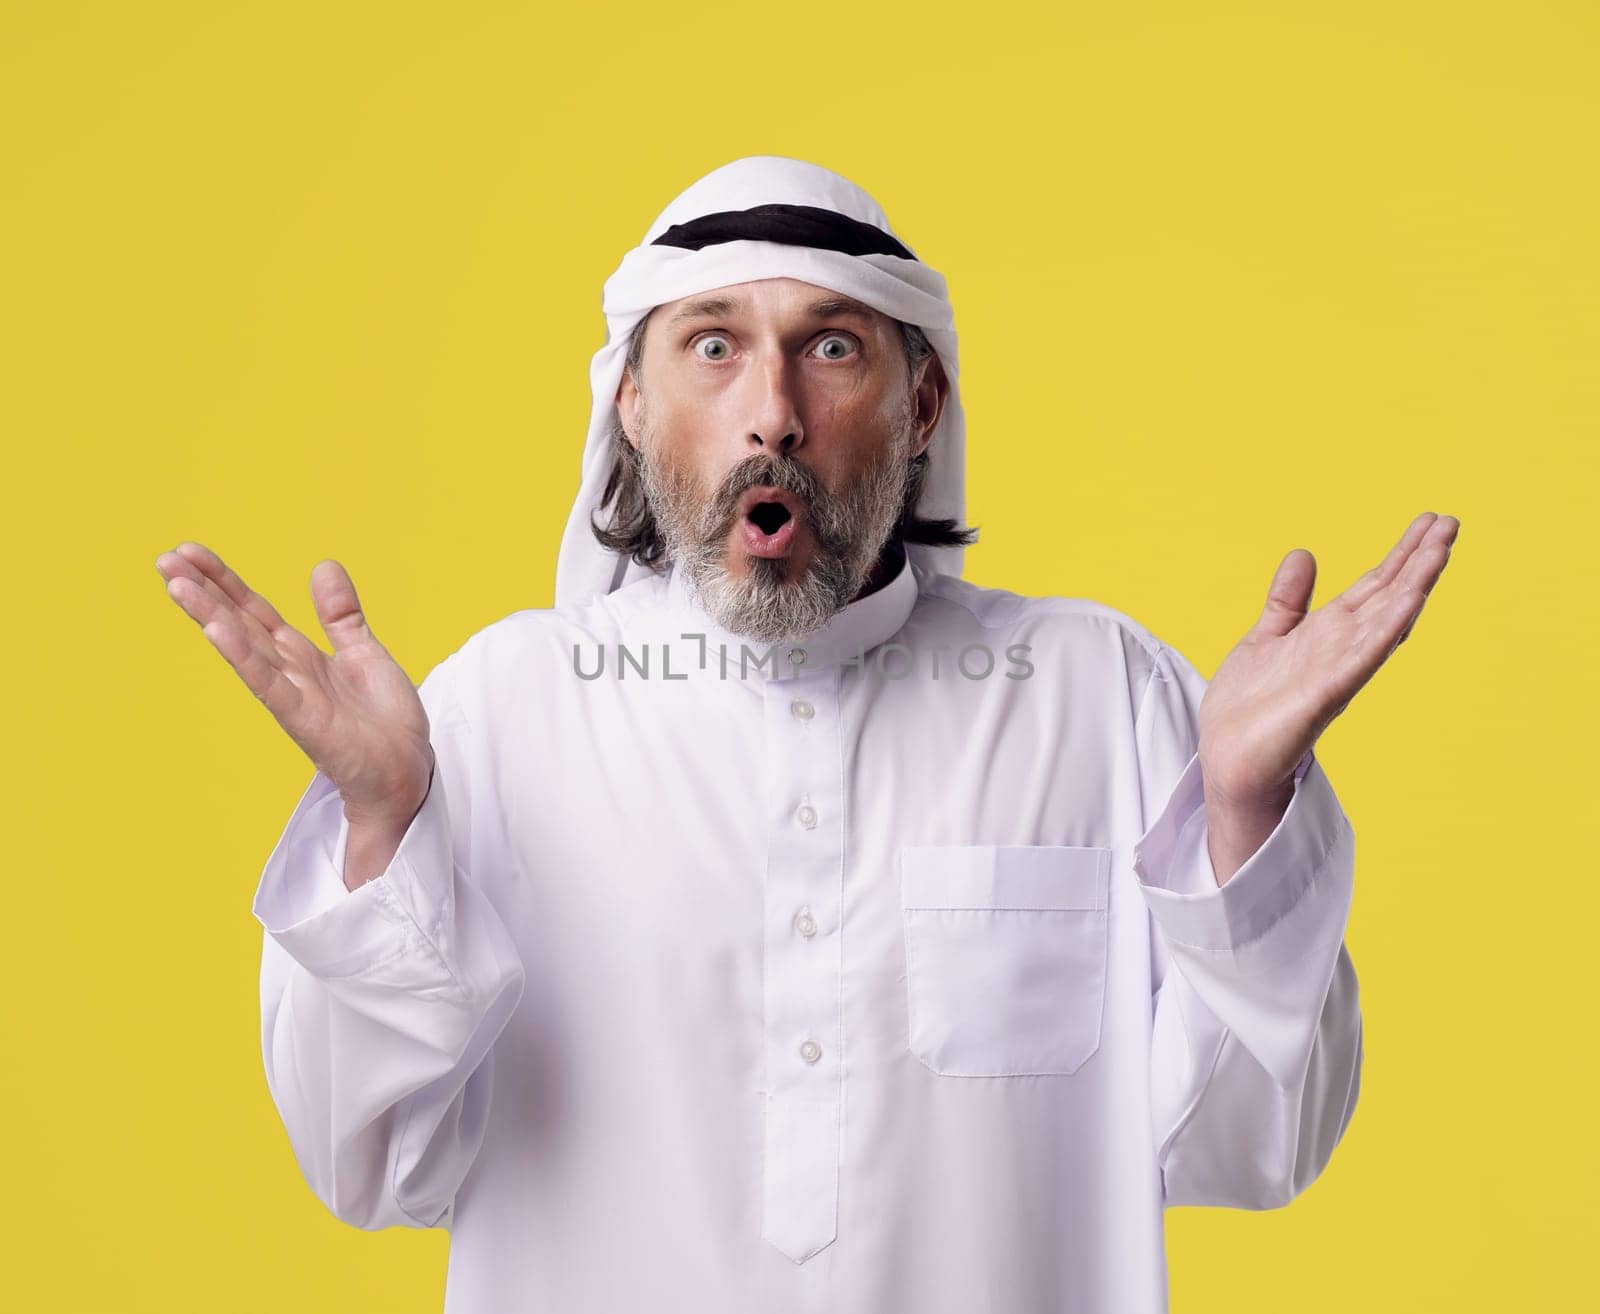 Surprised Arab man in traditional Dishdasha clothing raises both hands in the air, isolated on a bright yellow background with copy space. by LipikStockMedia